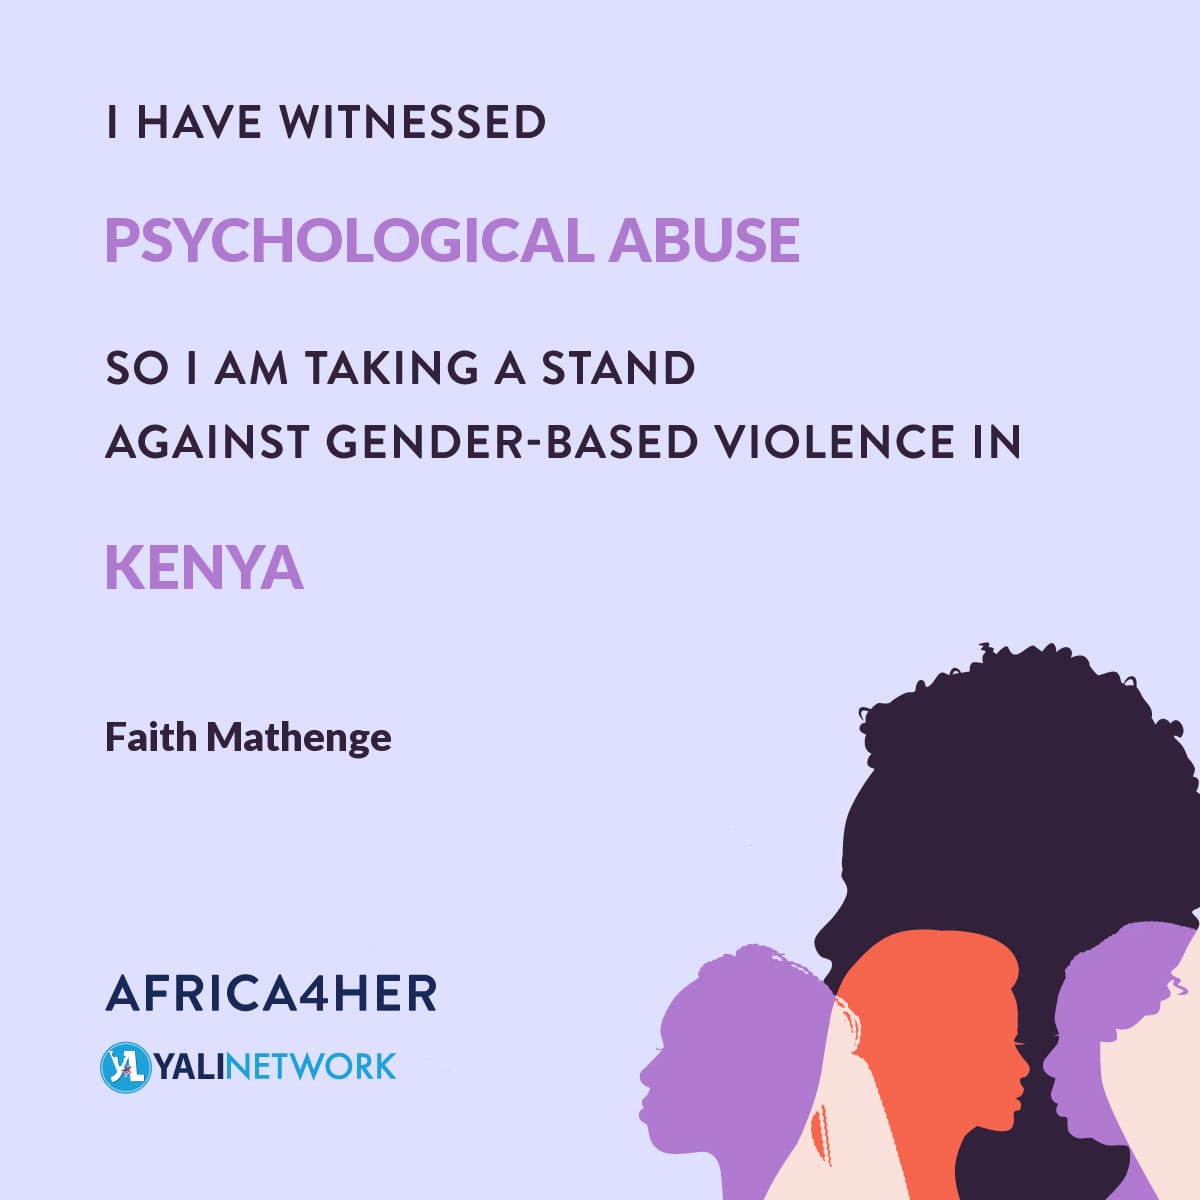 Psychological abuse(emotional abuse)is a form of abuse,characterized by a person subjecting or exposing another person to behavior that may lead to psychological trauma including anxiety,depression and post traumatic stress disorder.
#africa4her